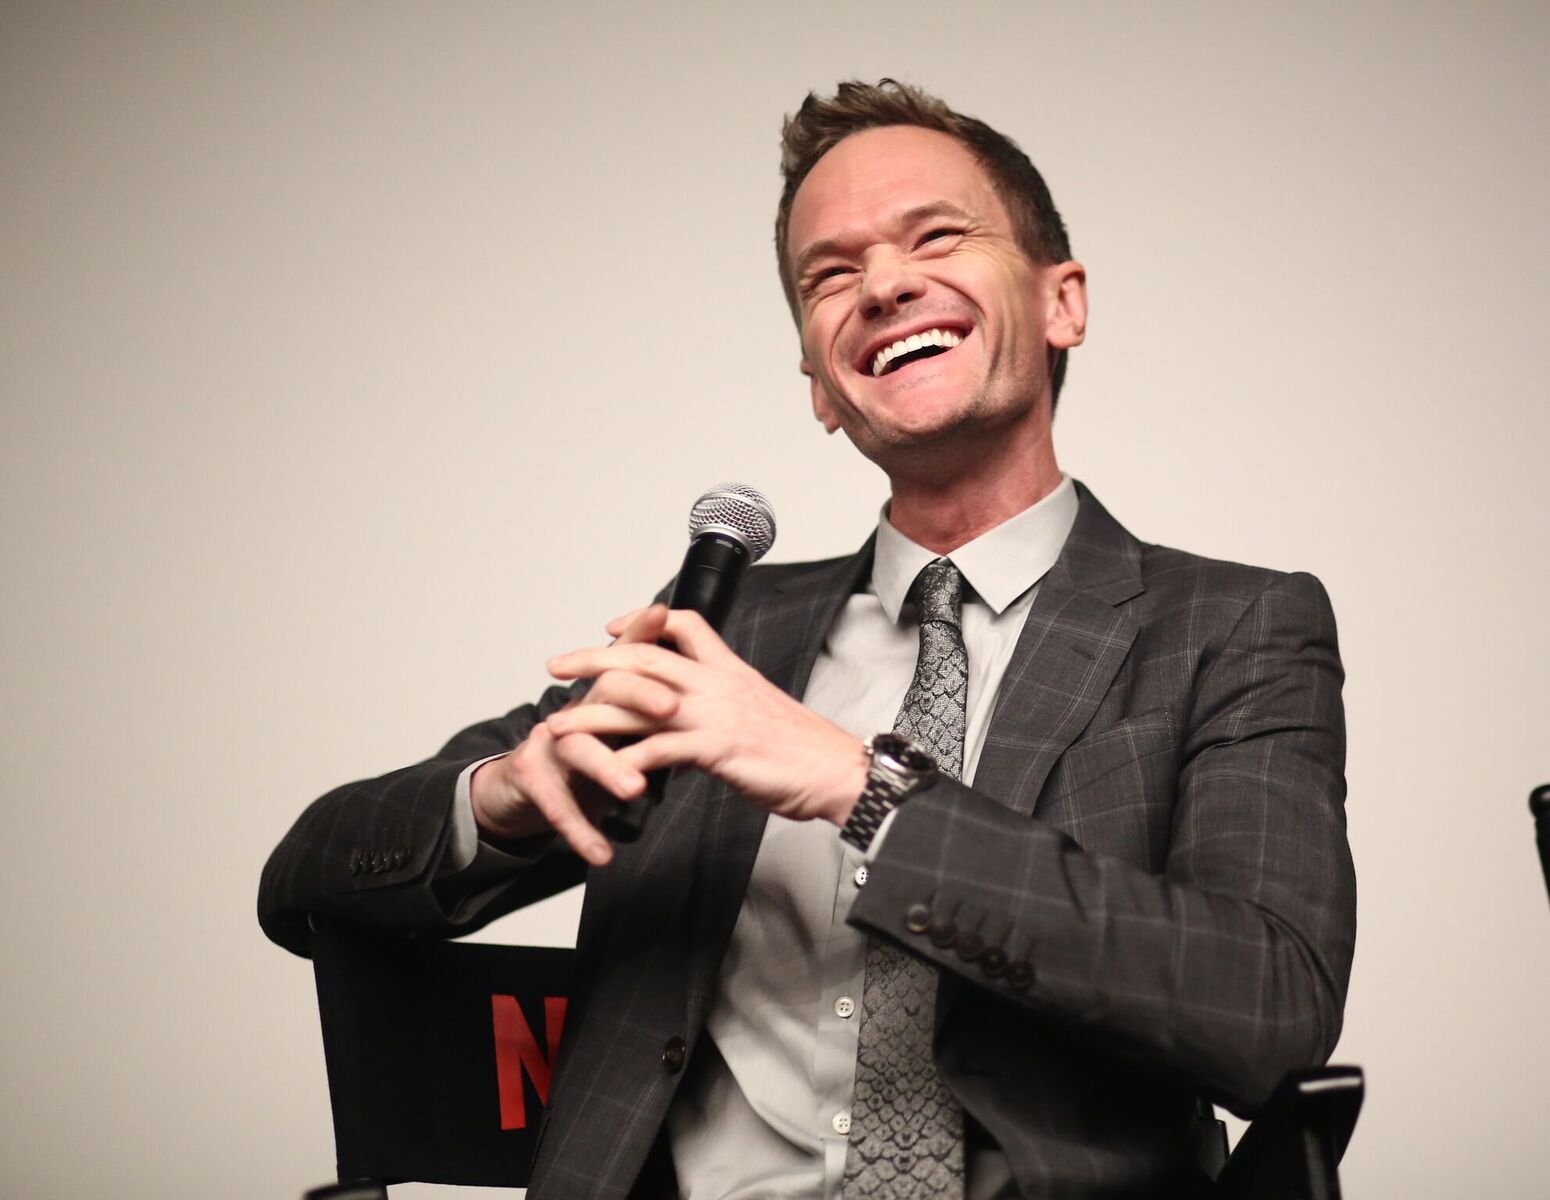 Neil Patrick Harris at Netflix's "A Series of Unfortunate Events" Red Carpet and Reception in 2019. | Photo: Getty Images